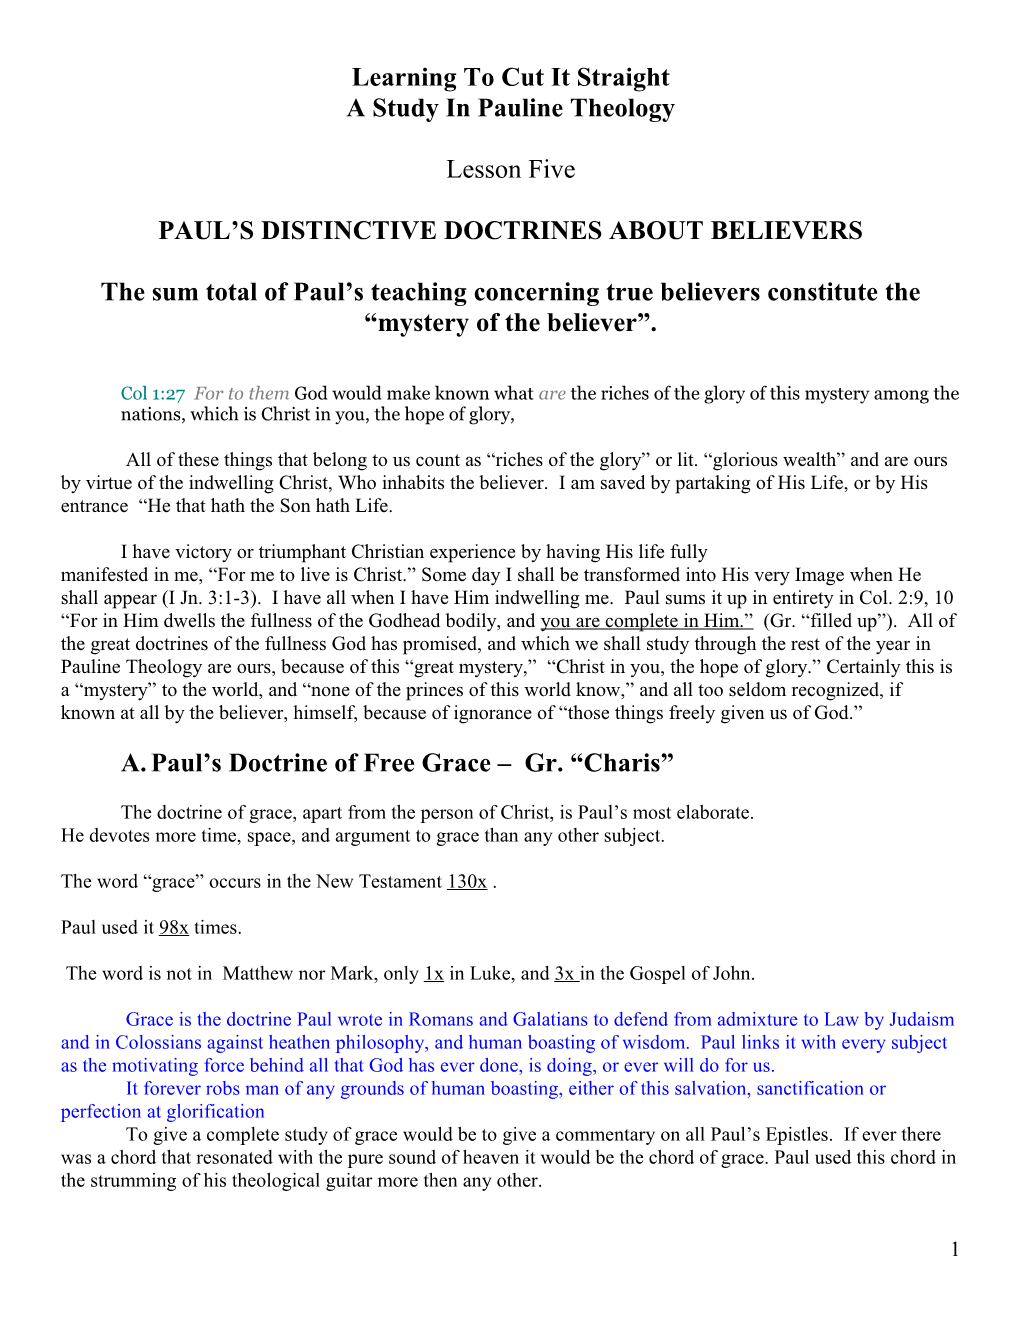 Paul S Distinctive Doctrines About the Believers